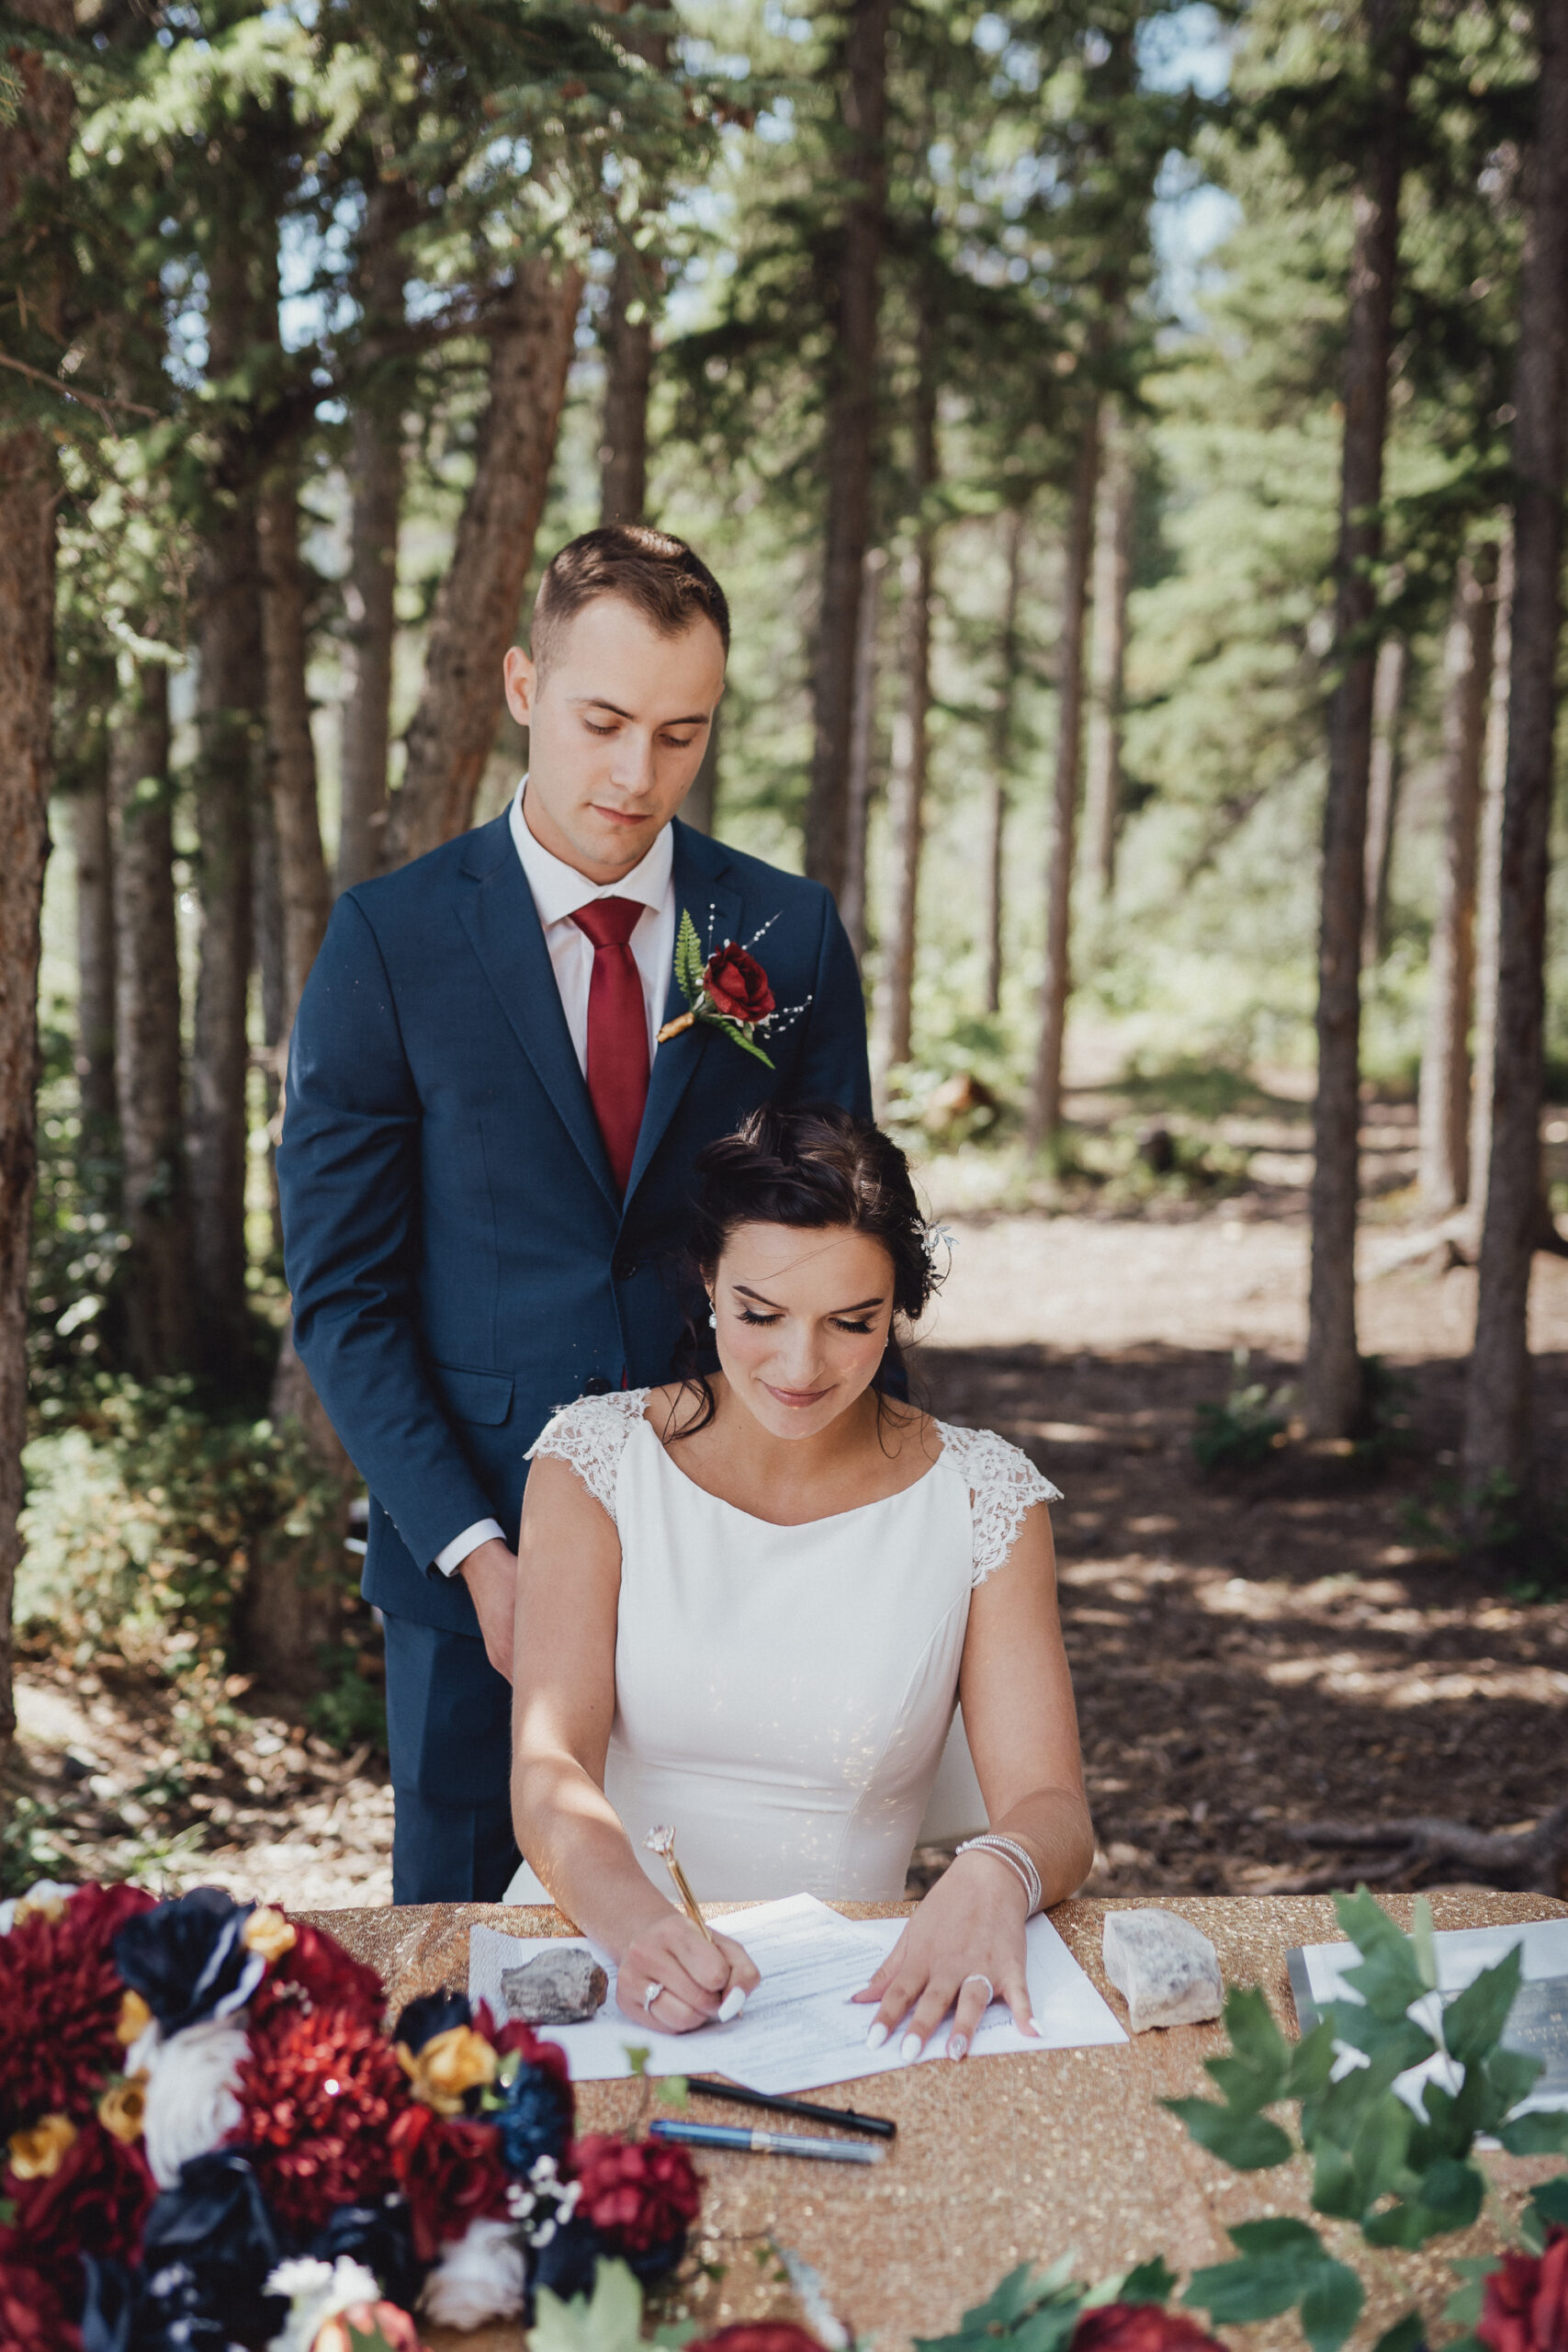 Couple in the woods signing their wedding license with red wedding flowers in the foreground